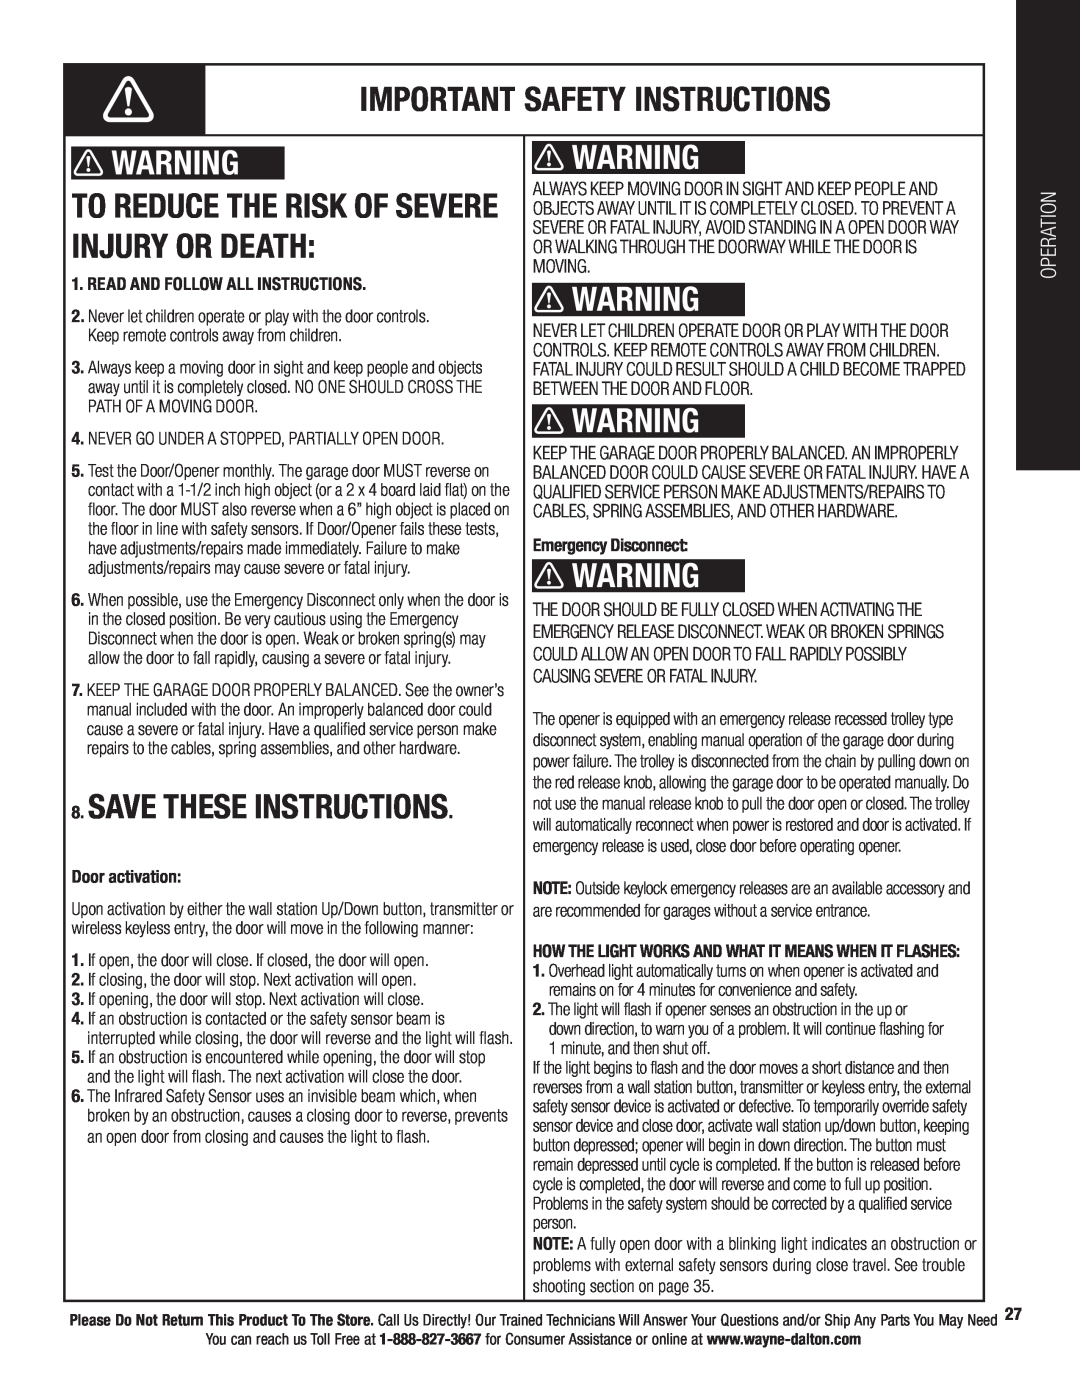 Wayne-Dalton 3224C Important Safety Instructions, To Reduce The Risk Of Severe Injury Or Death, Save These Instructions 